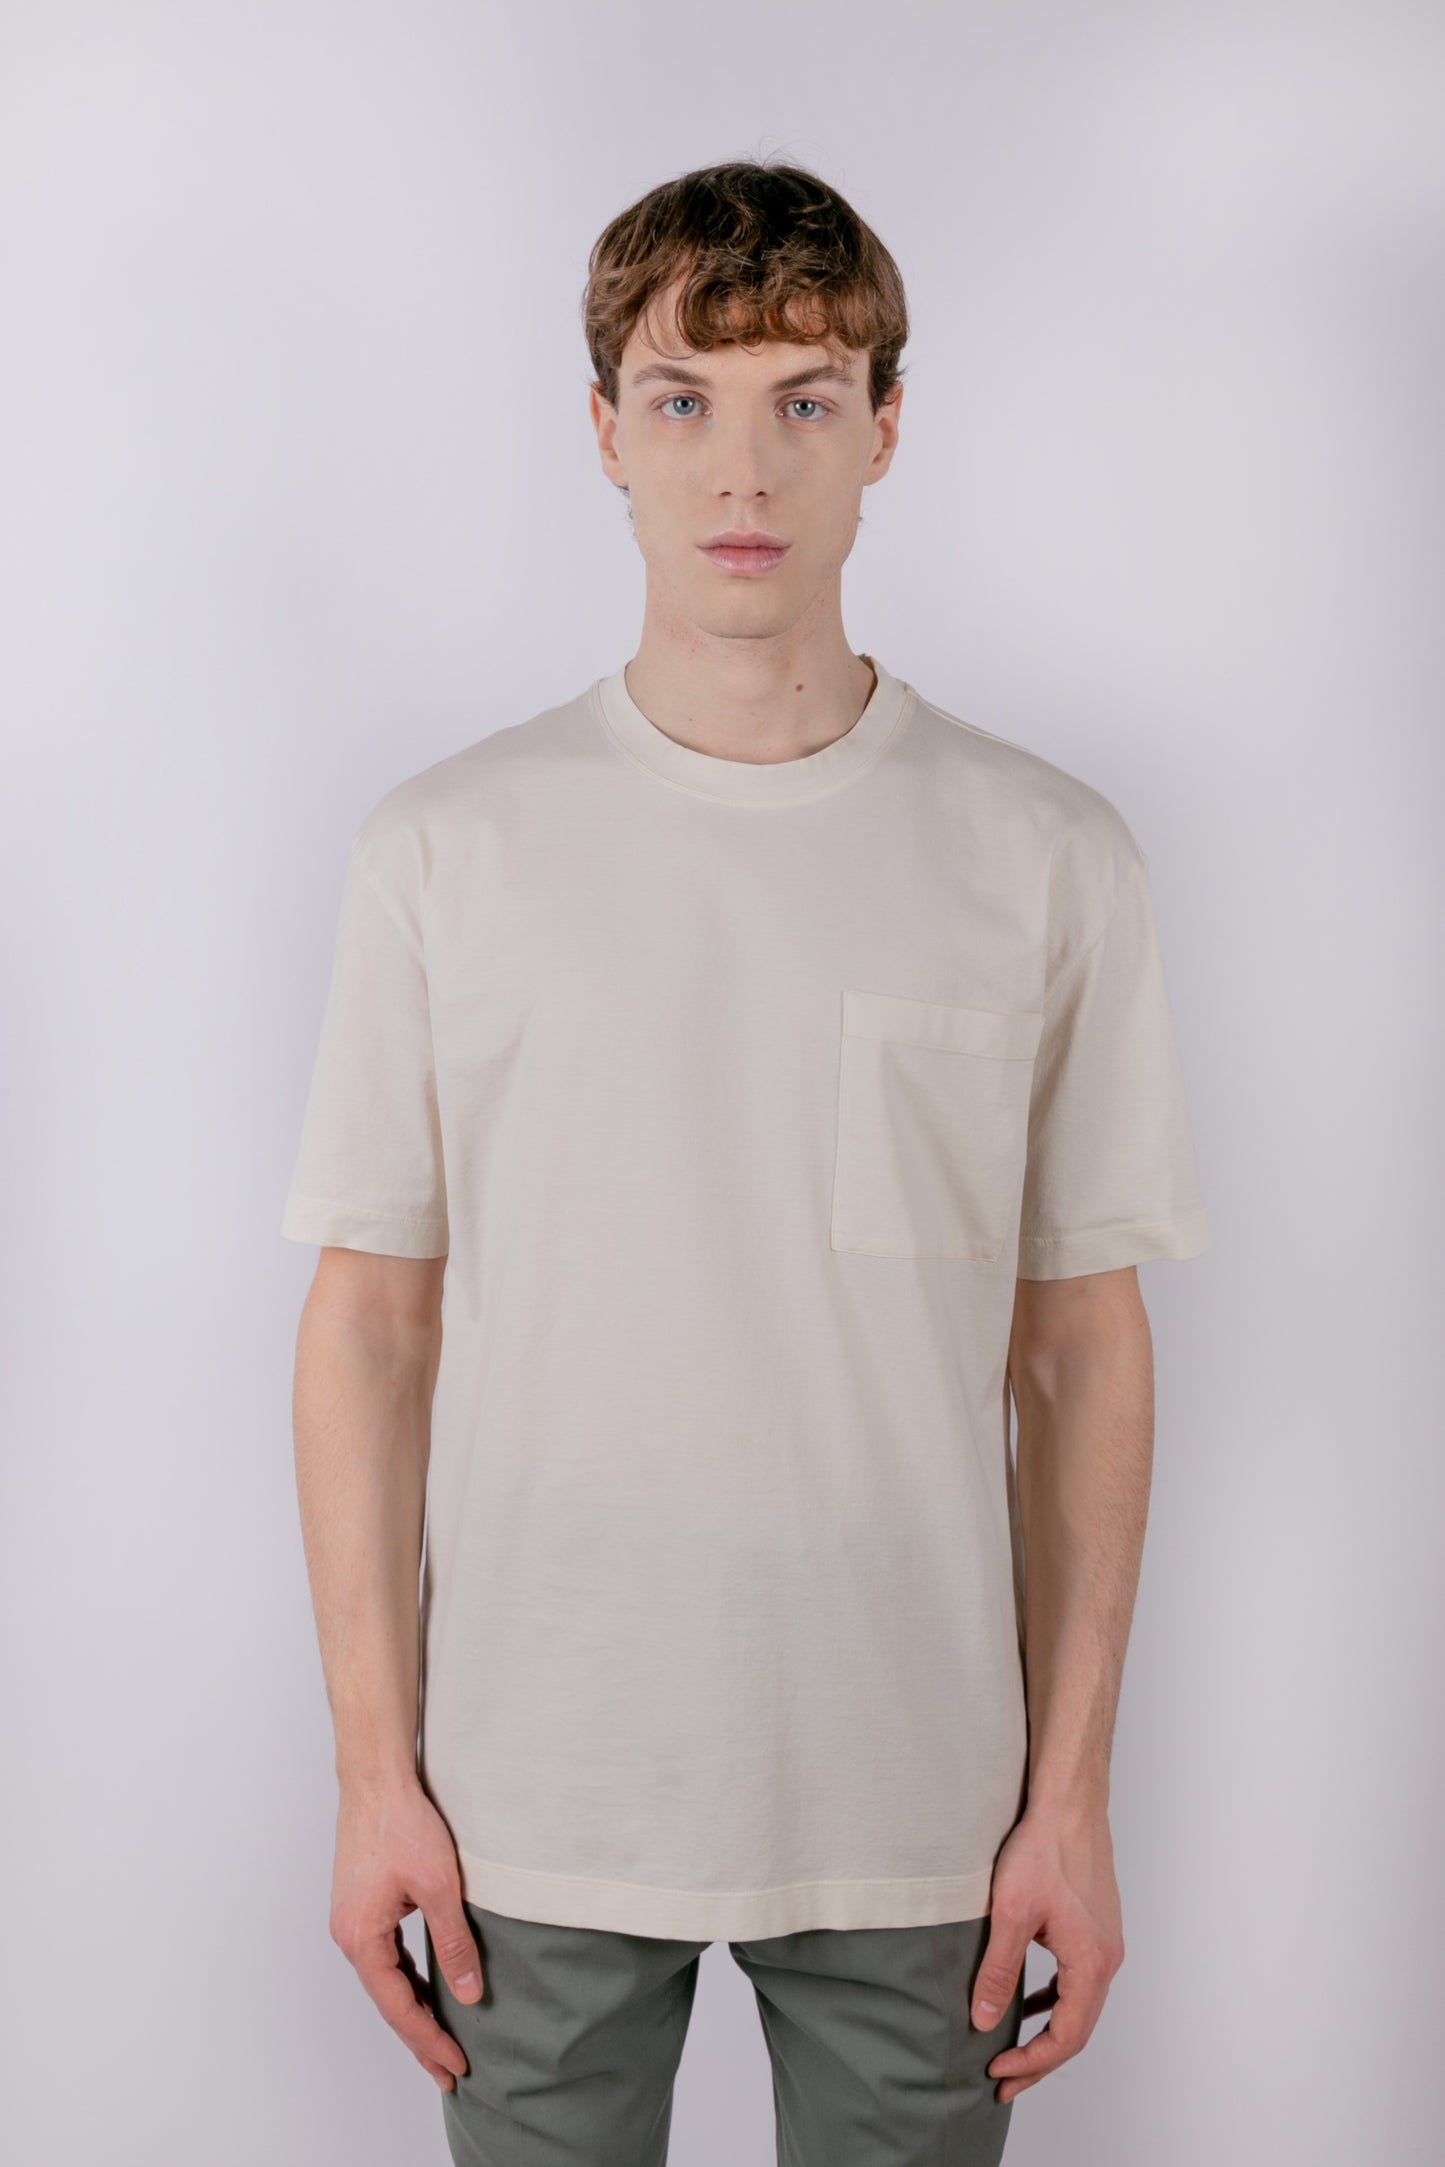 T-shirt with pocket in natural color